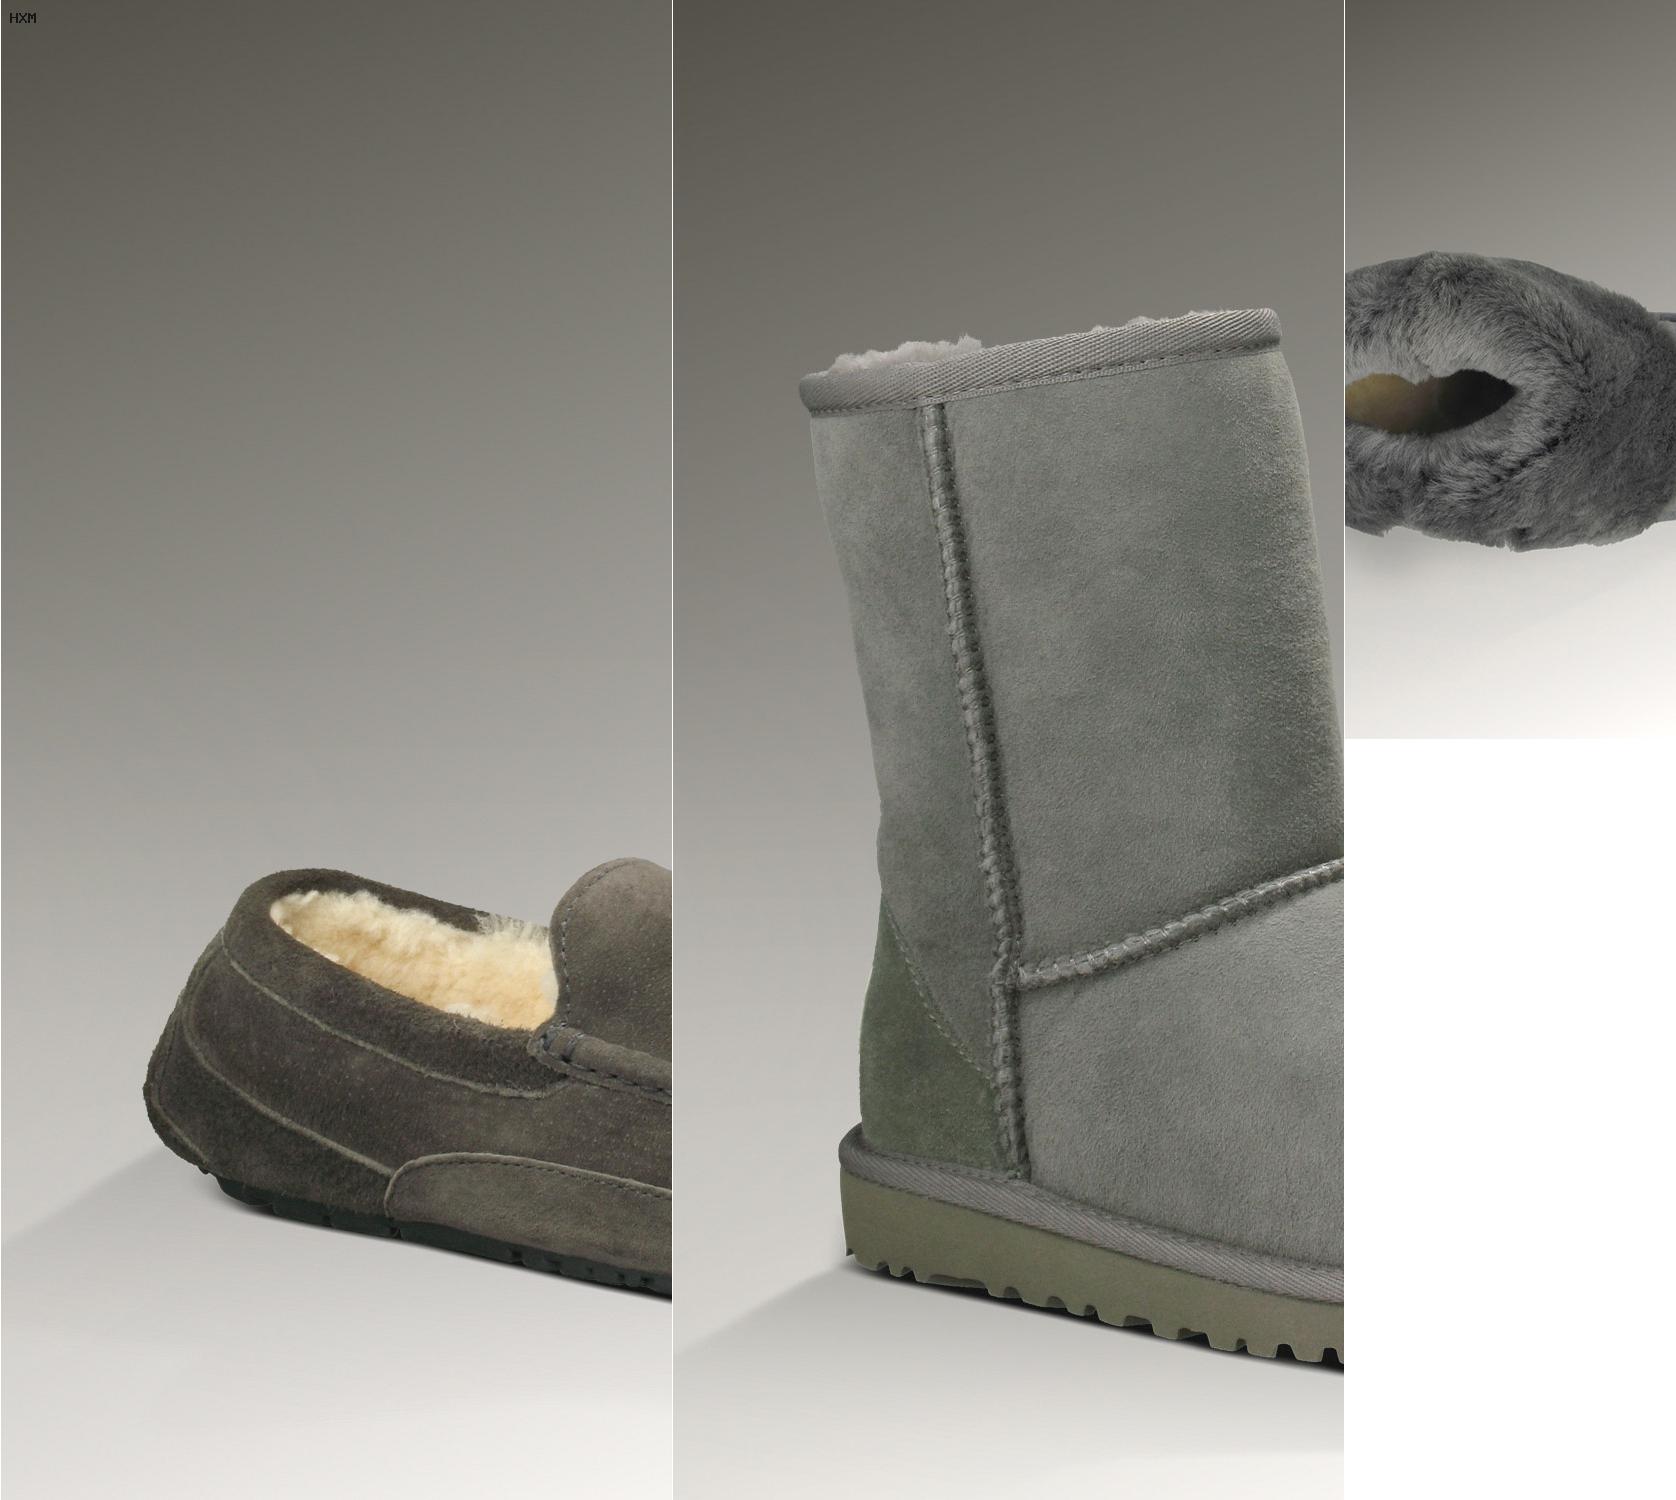 ugg outlet botas opiniones